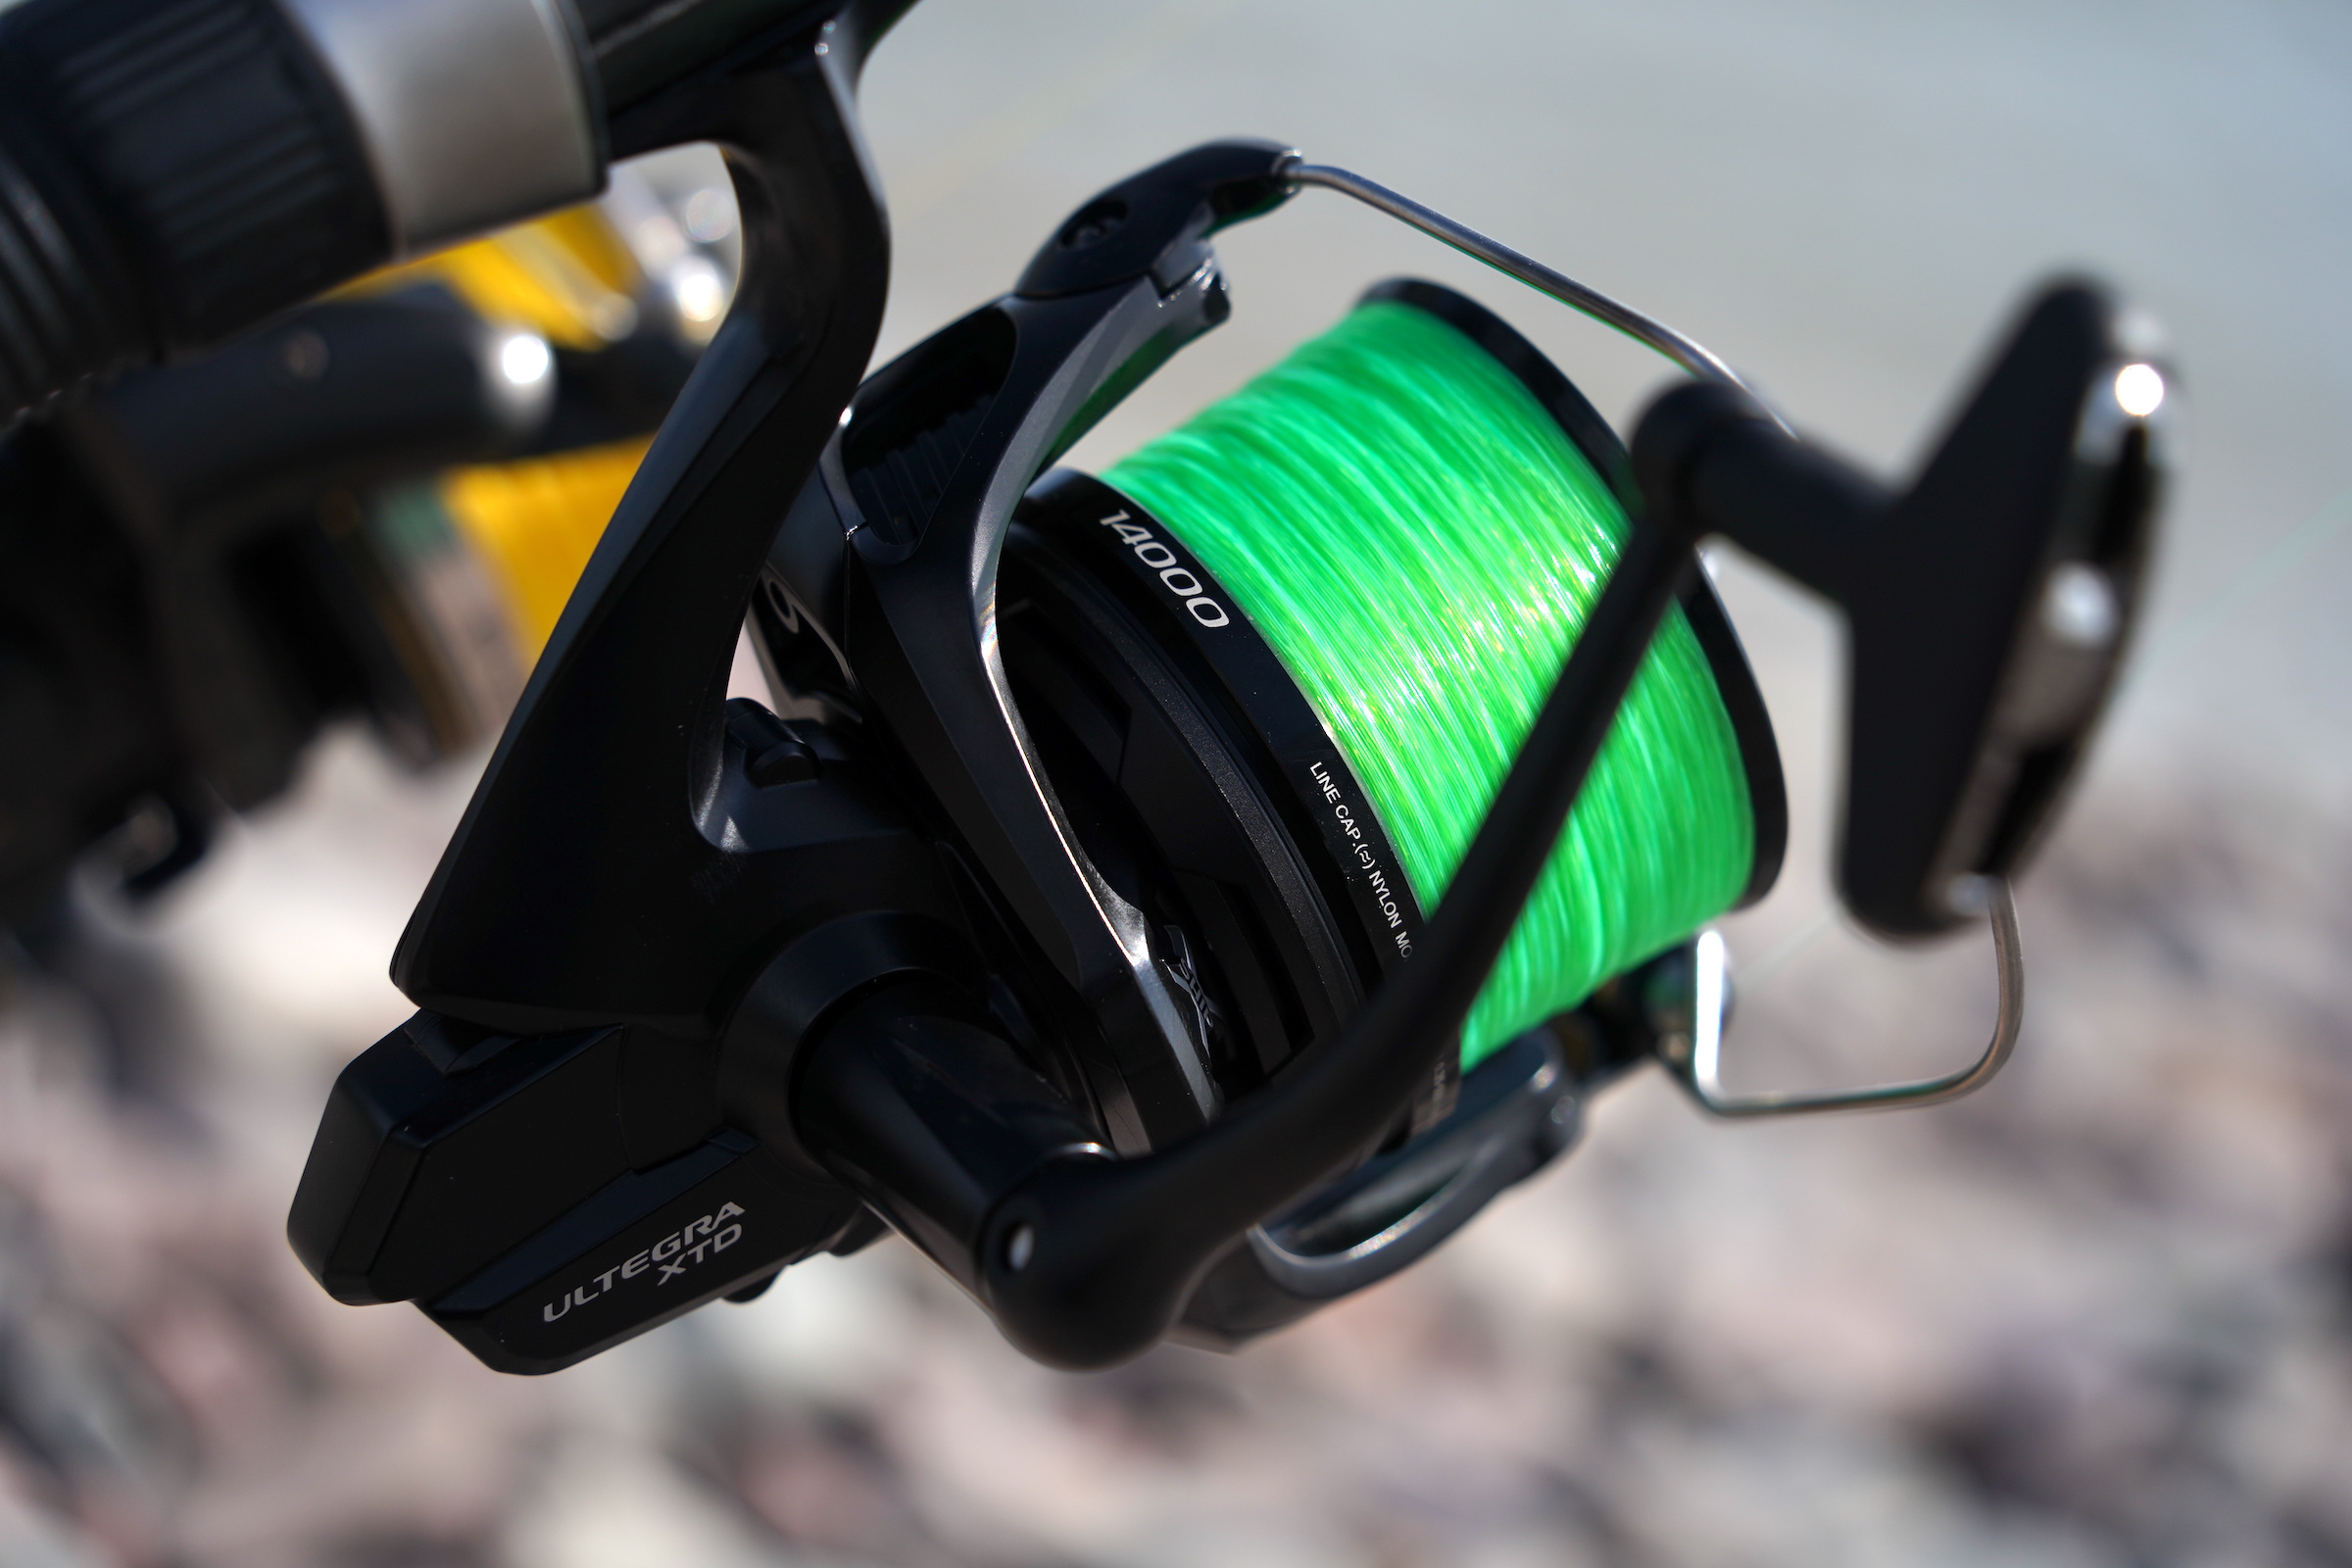 Ultegra 14000 - one of the best beach casting reels